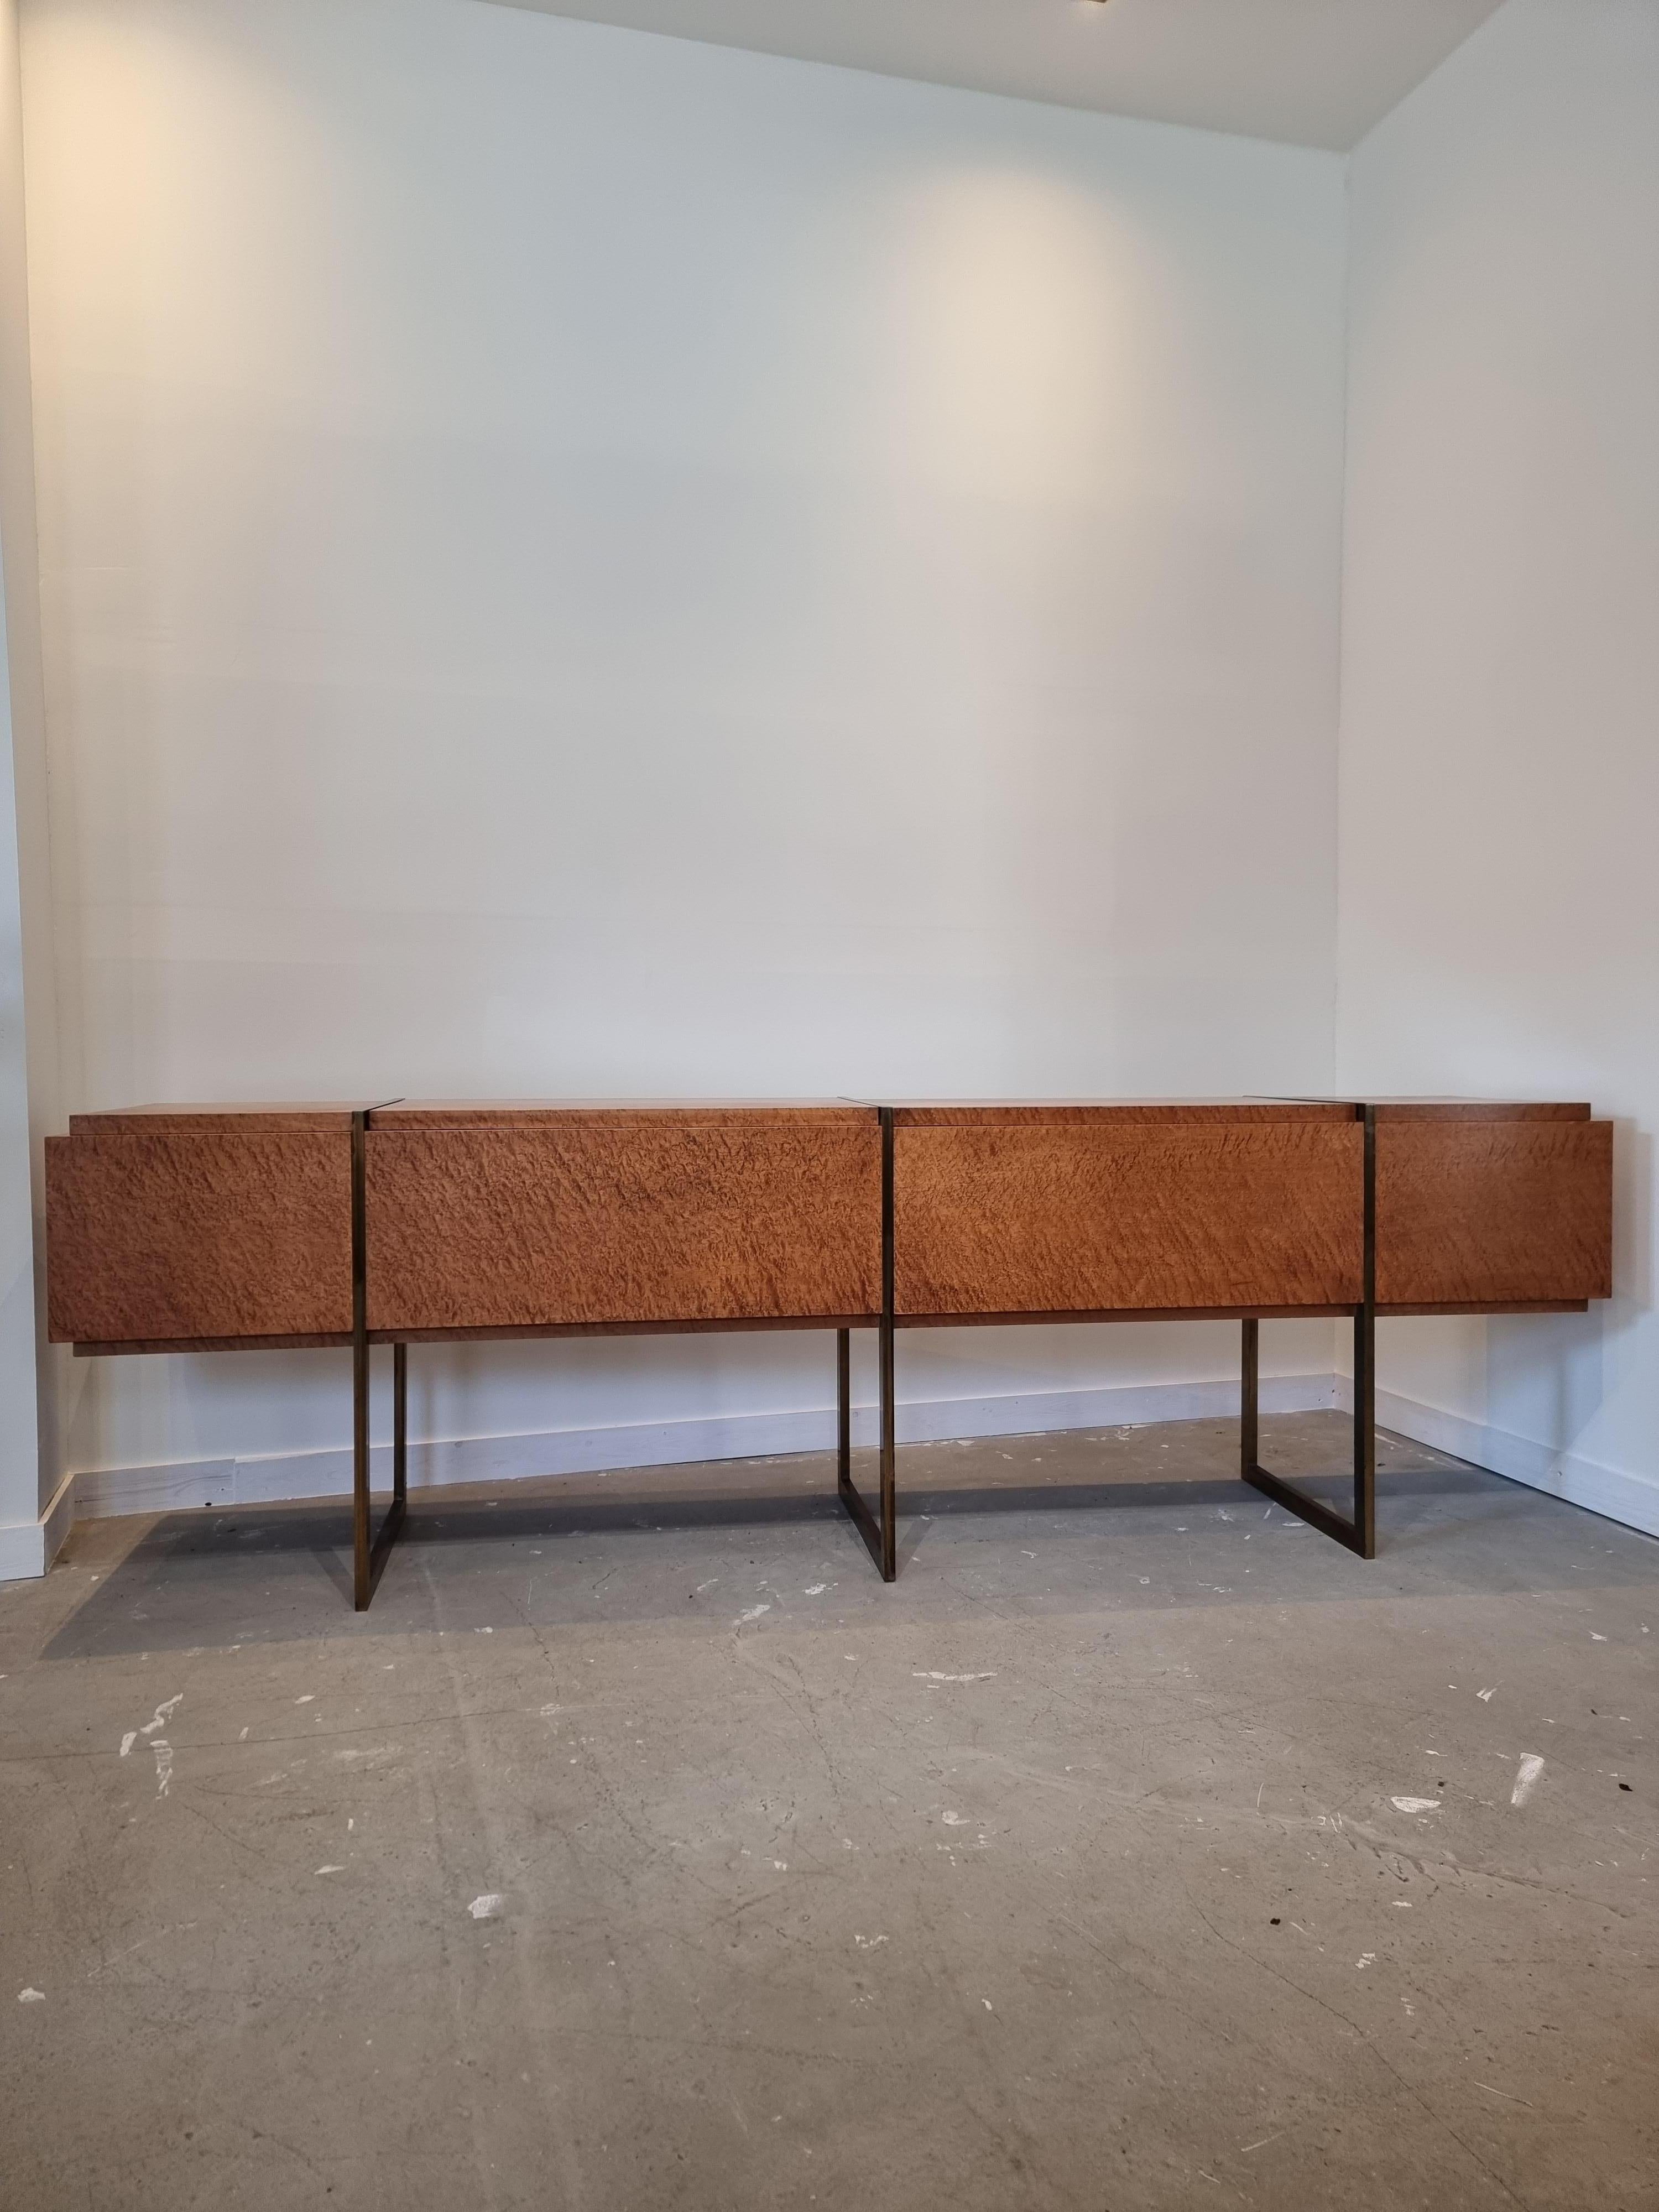 Beautiful sideboard or credenza in Olive burl wood veneer with 3 slim brass base legs by Jean Claude Mahey.
The piece is a beautiful Mid-Century Modern / 1970s 
In style of Milo Baughman for Thayer Coggin. 
A very big, long piece!
4 burlwood